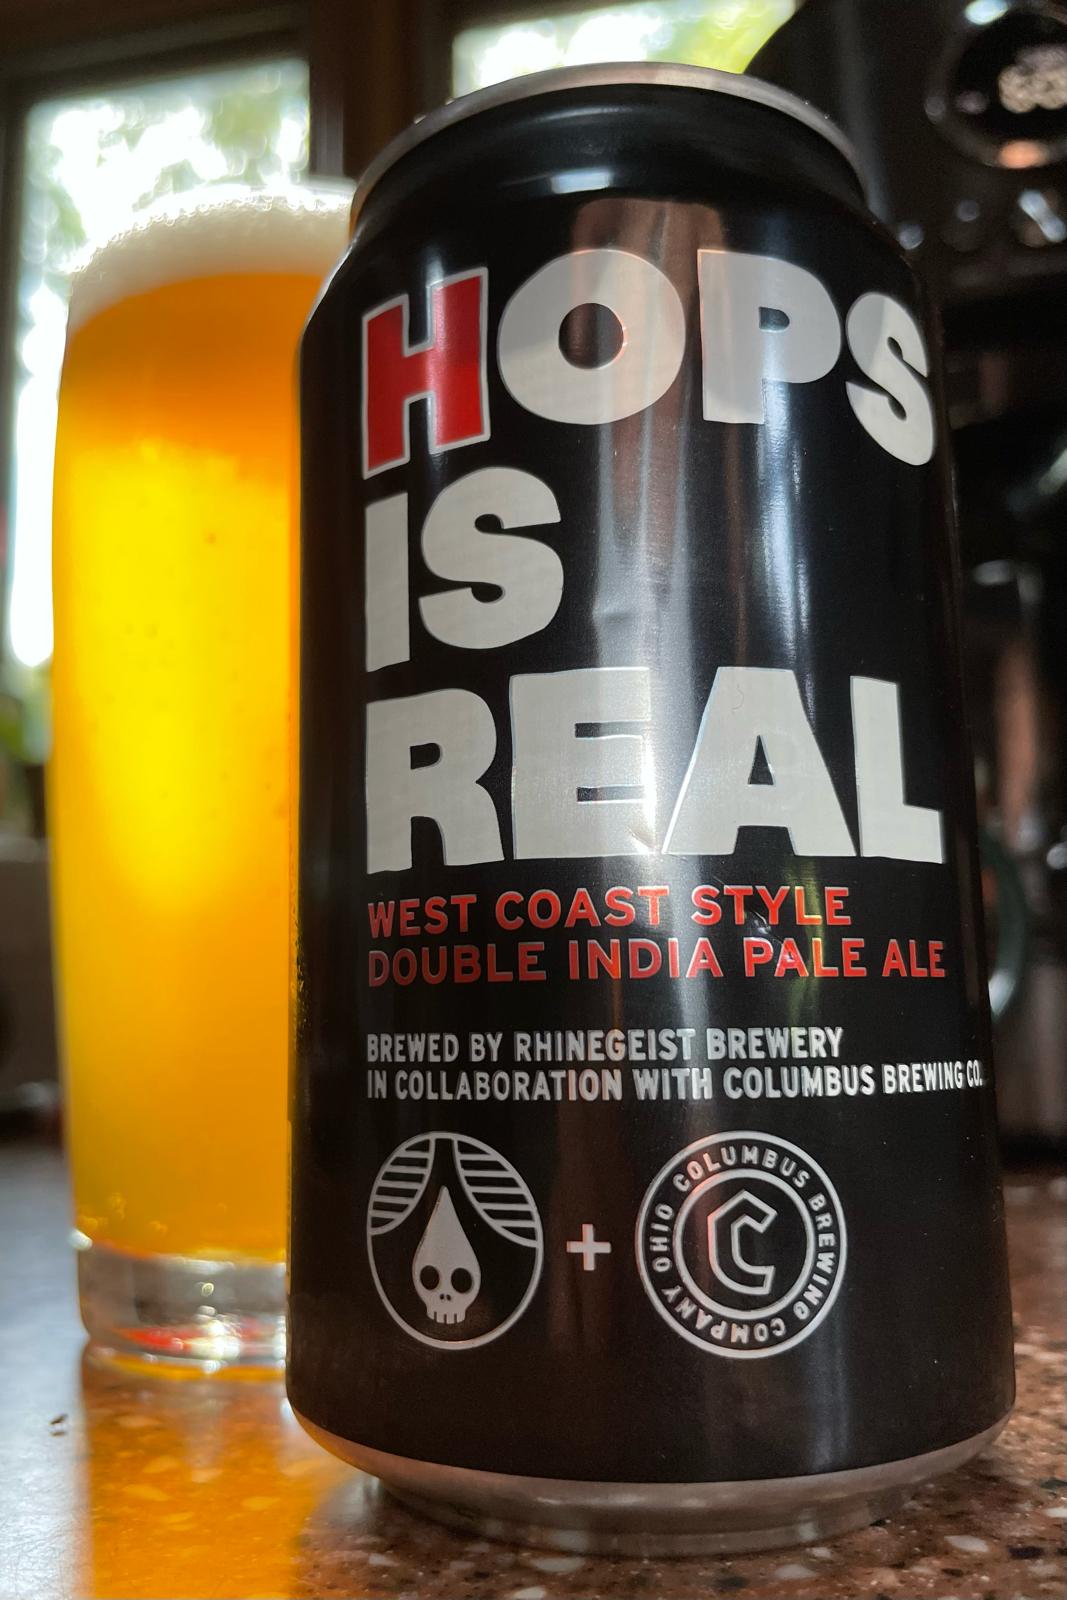 Hops Is Real (Collaboration with Columbus Brewing)